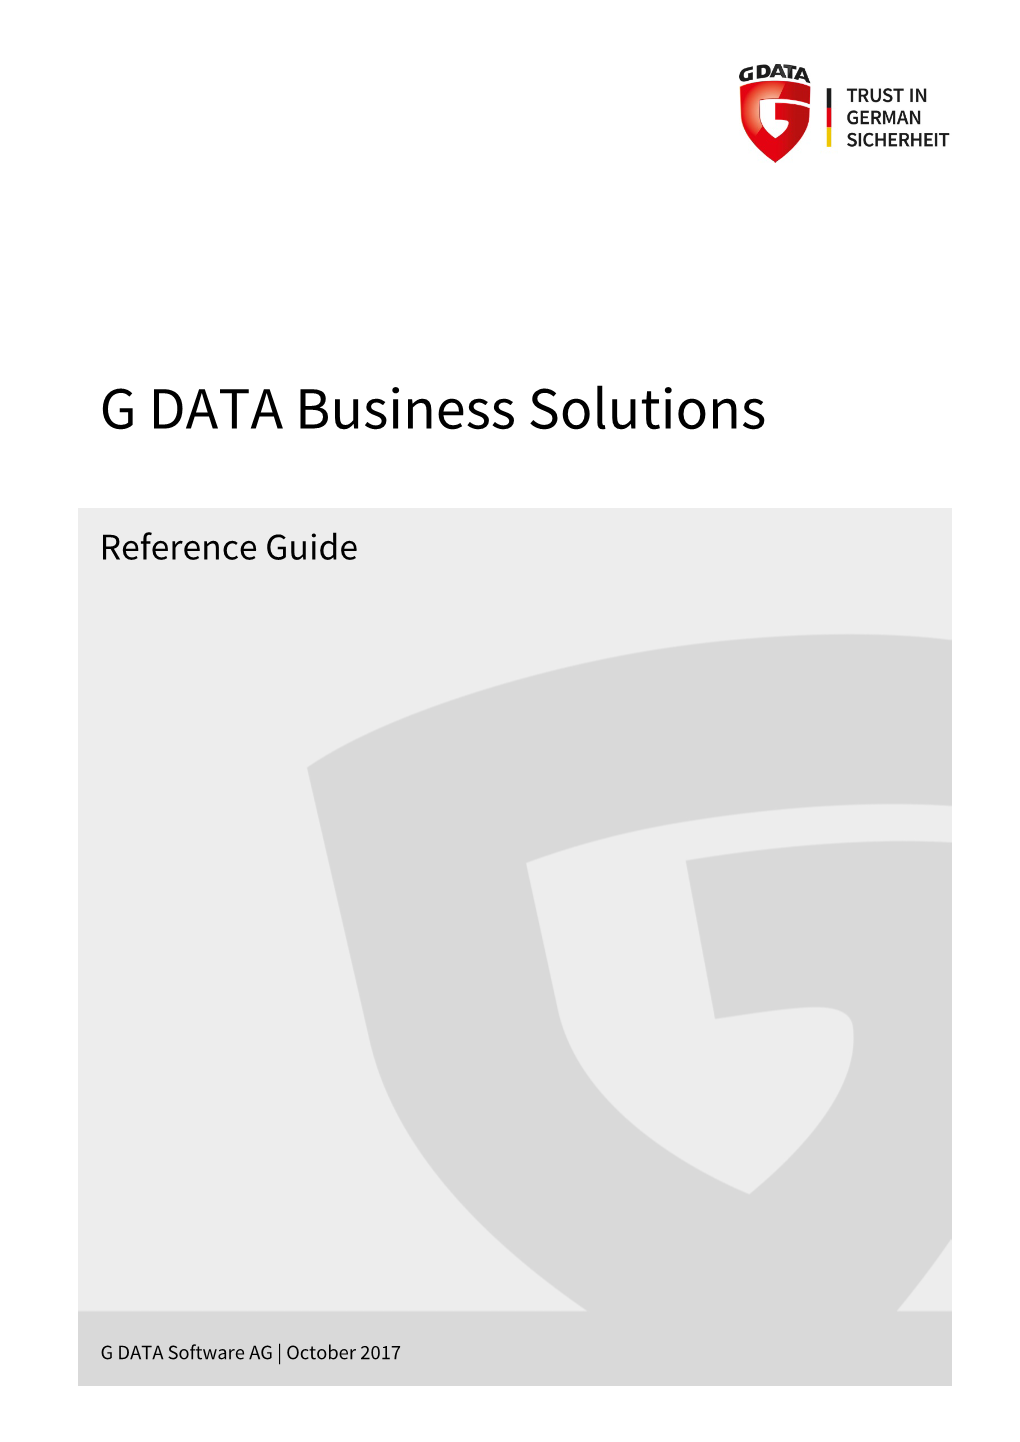 G DATA Business Solutions Reference Guide